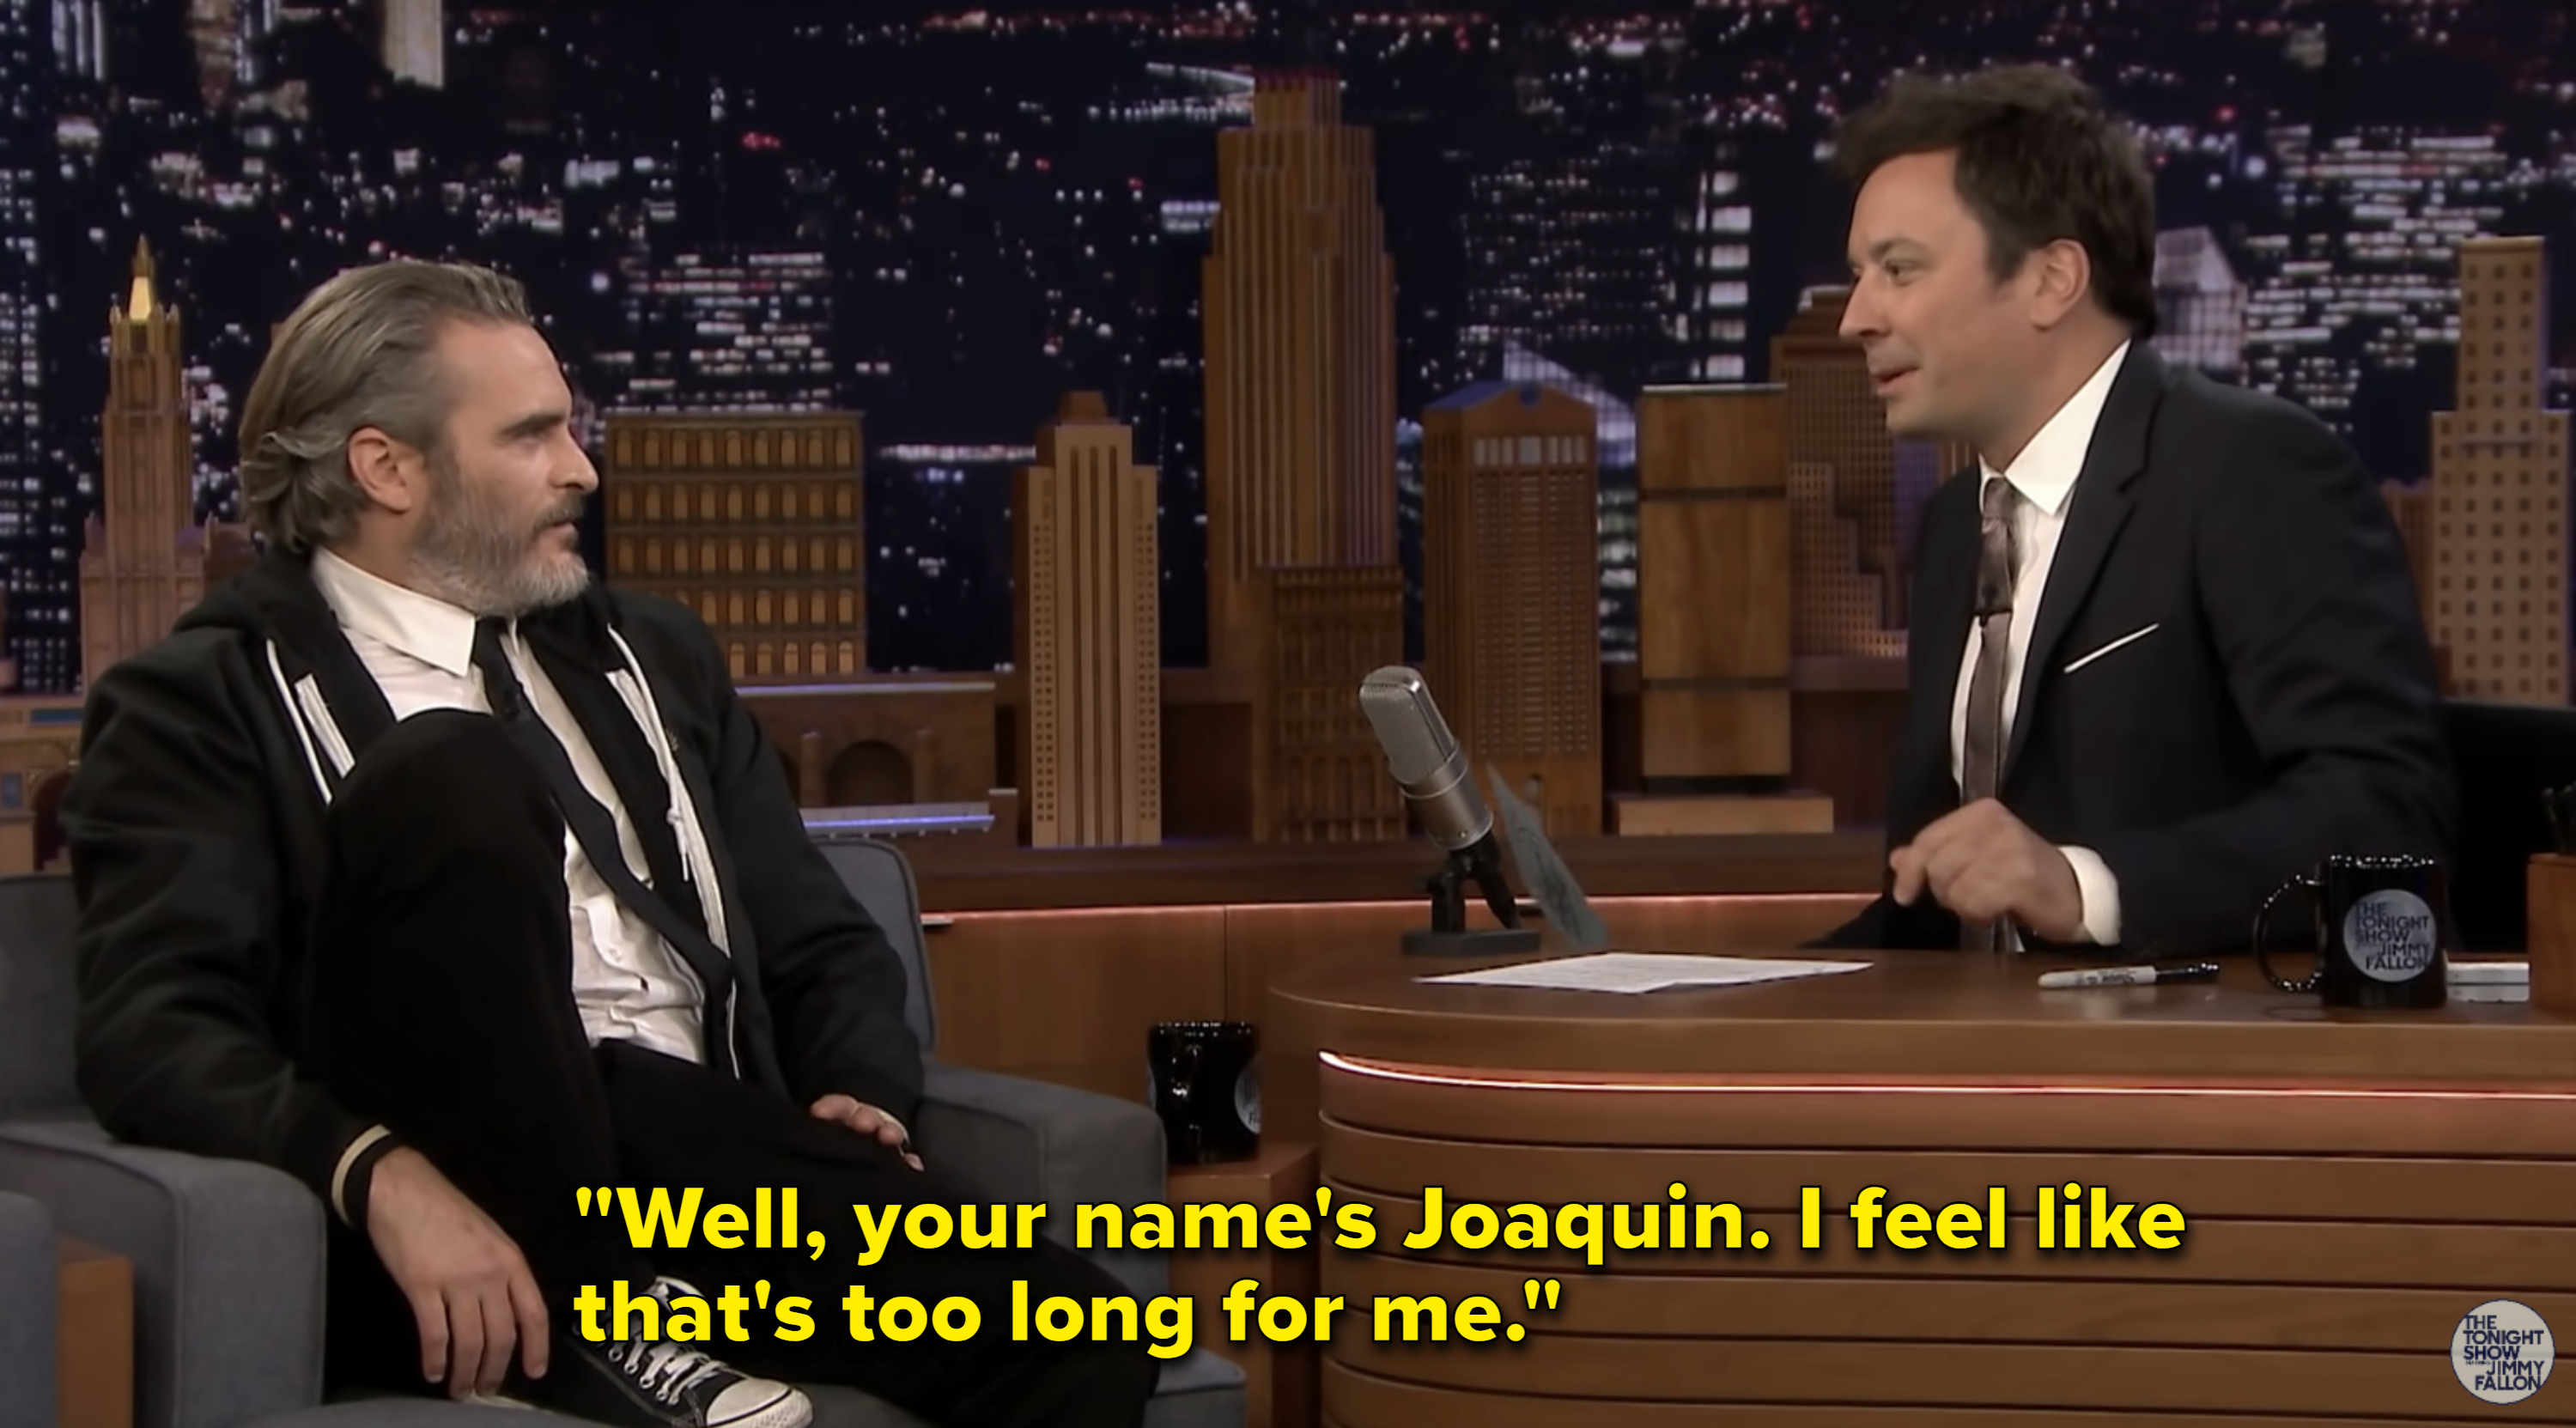 Jimmy says ,&quot;Well, your name&#x27;s Joaquin. I feel like that&#x27;s too long for me&quot;